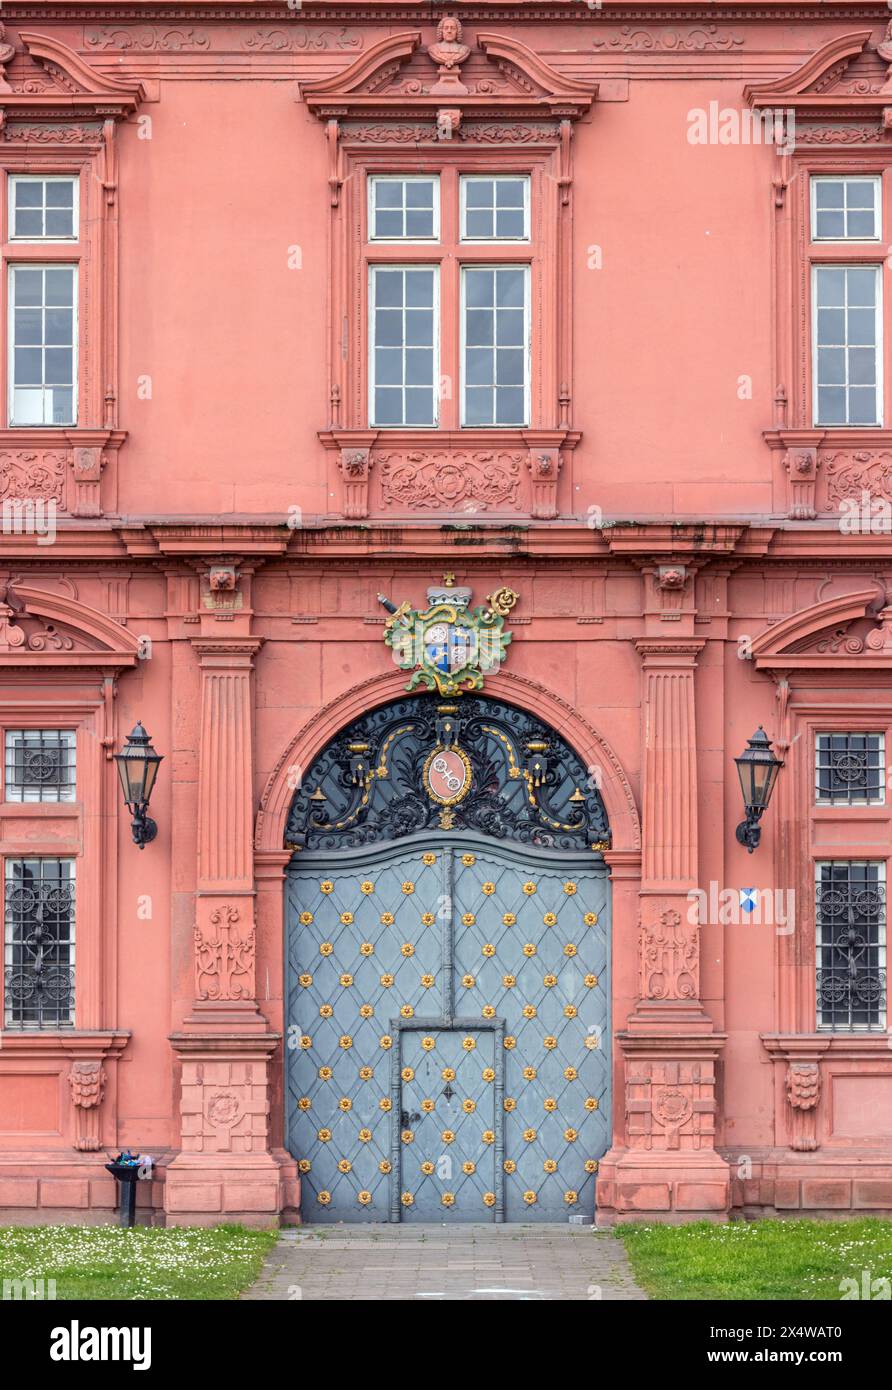 Facade with ornamented gate of the Electoral Palace of Mainz, an important example of renaissance architecture in Germany. Stock Photo